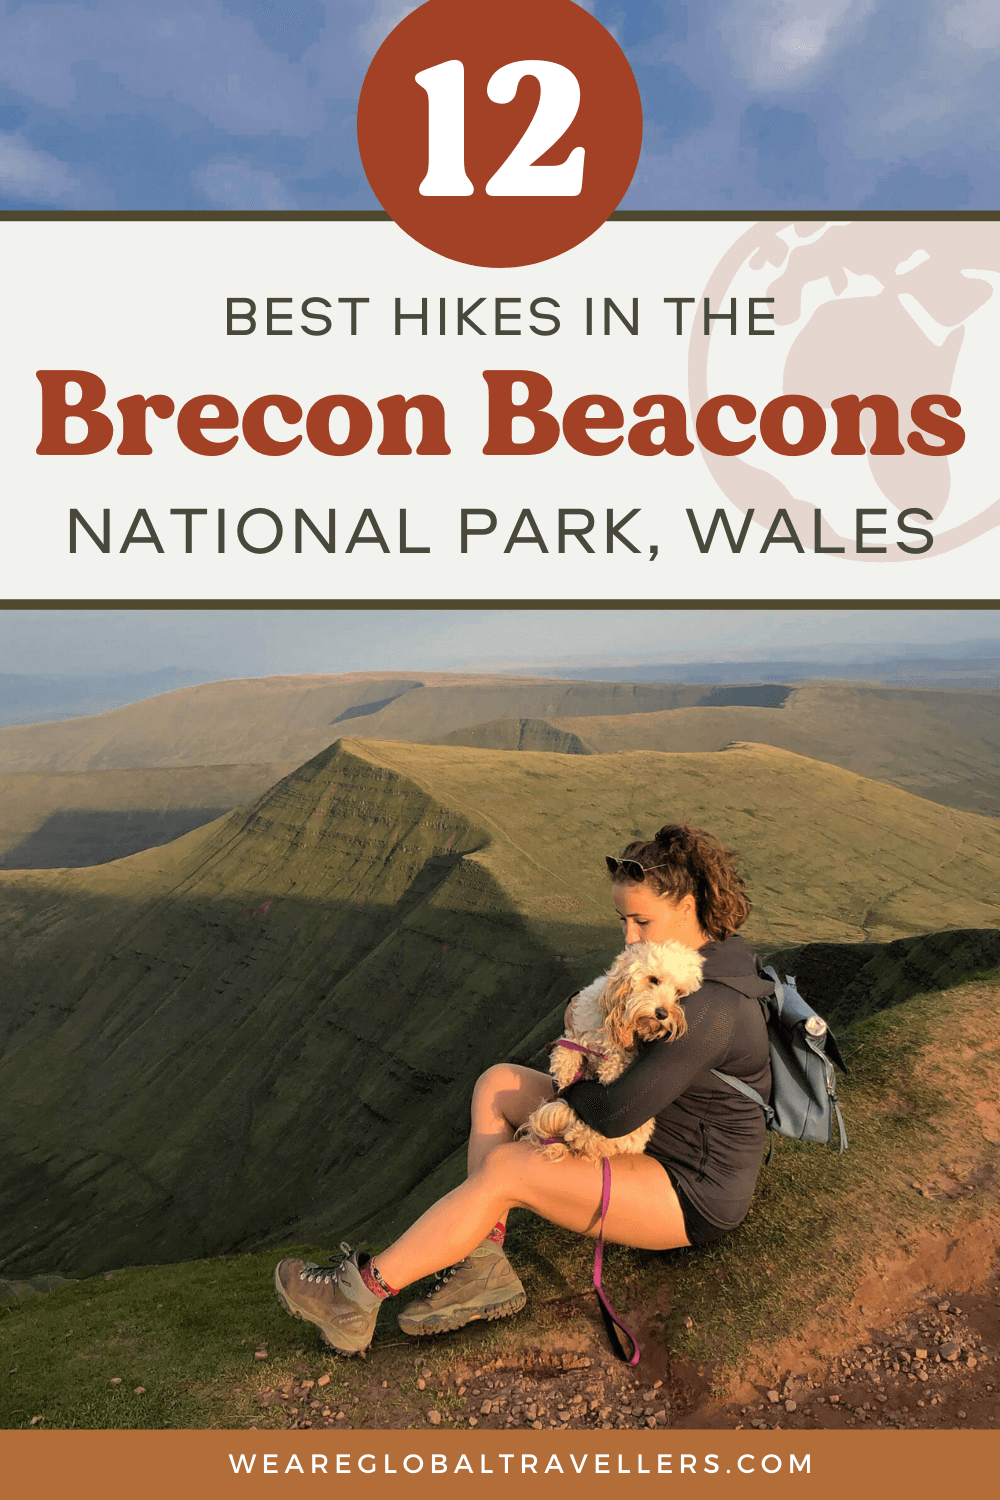 The best hikes in the Brecon Beacons, Wales